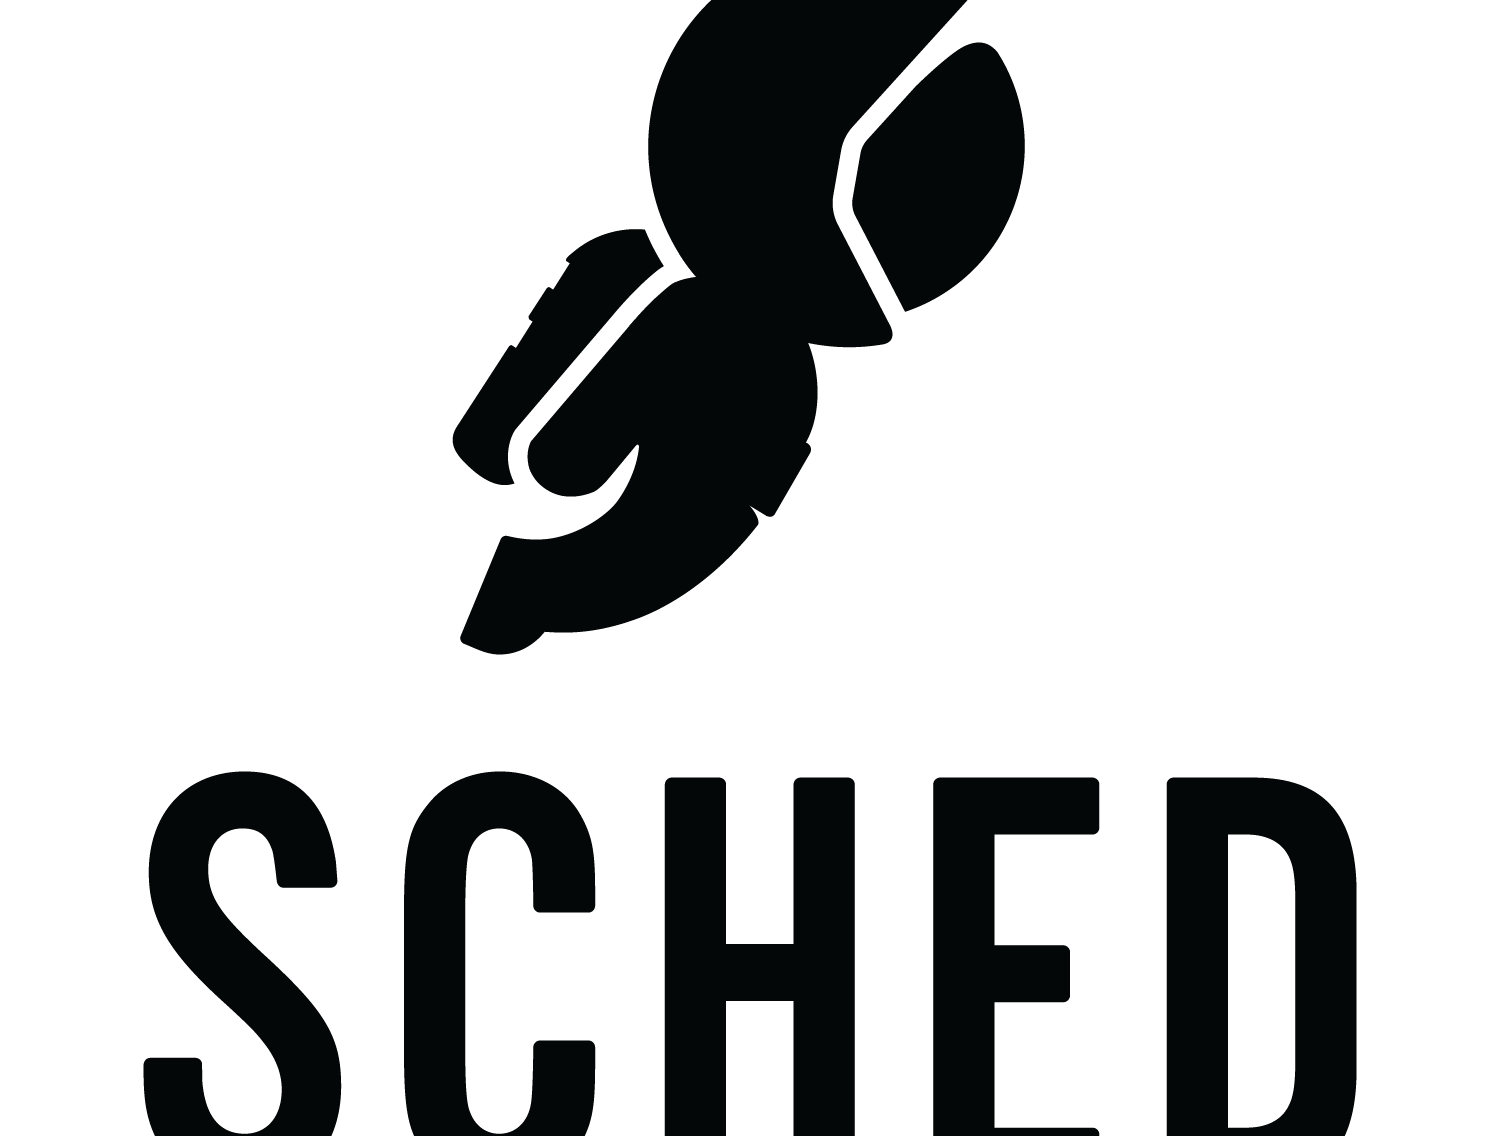 Sched Logo - Index of /wp-content/uploads/sites/7/2018/03